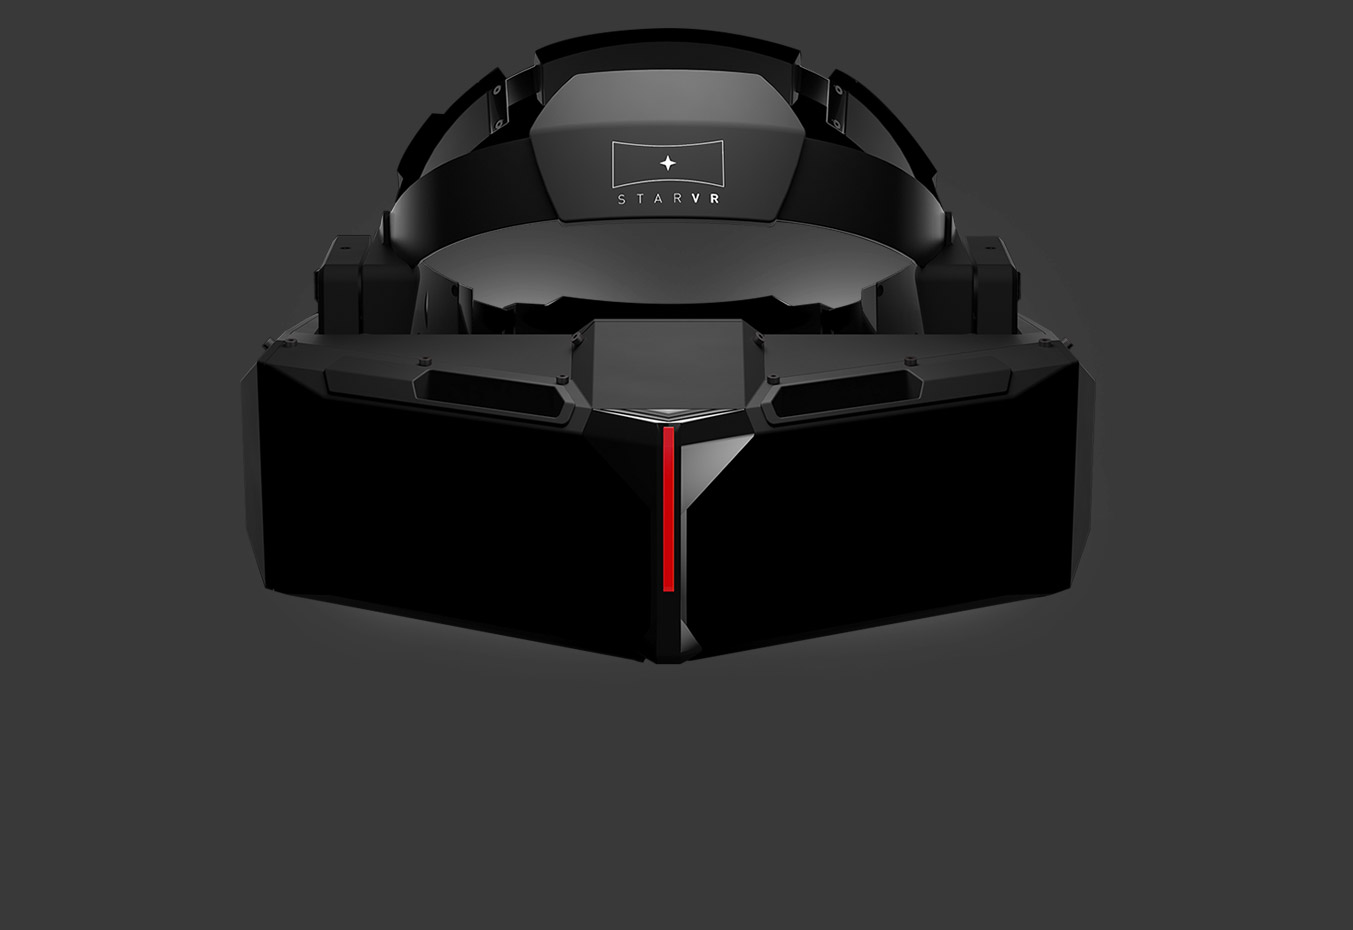 IMAX to Use StarVR Degree FOV Headset for Premium VR Film Experiences – Road to VR